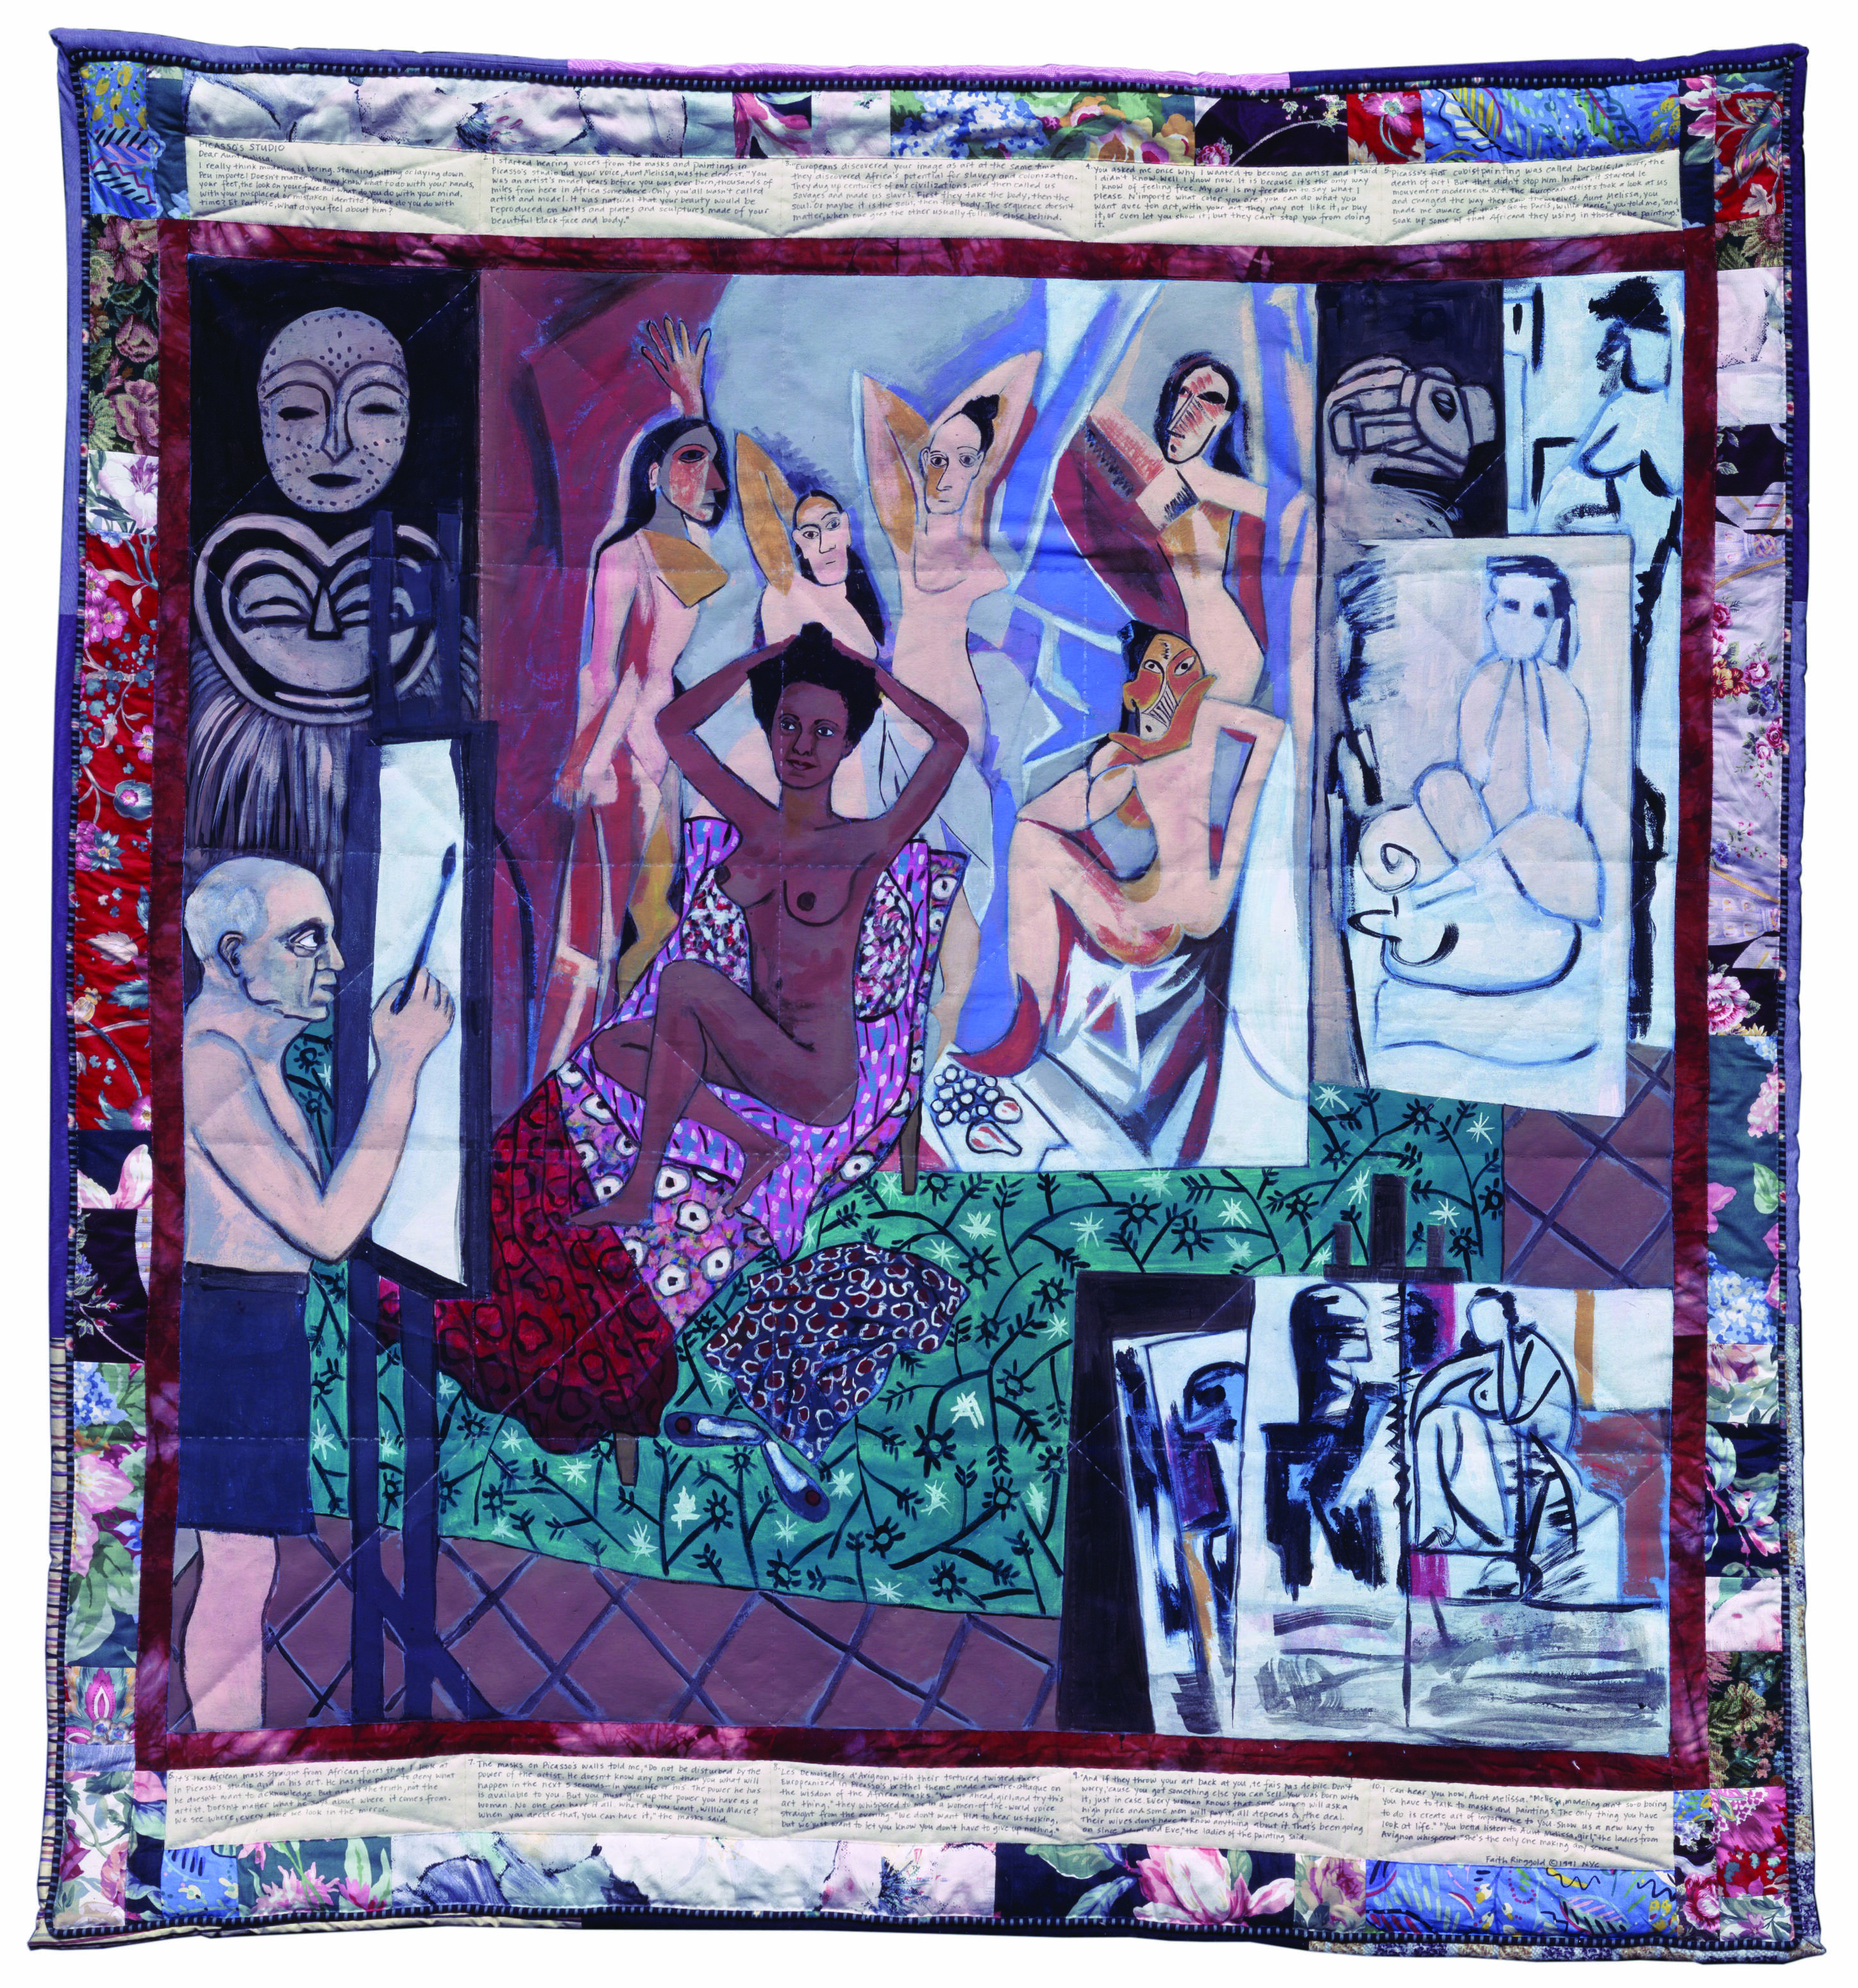 The French Collection and the liberty of Faith Ringgold